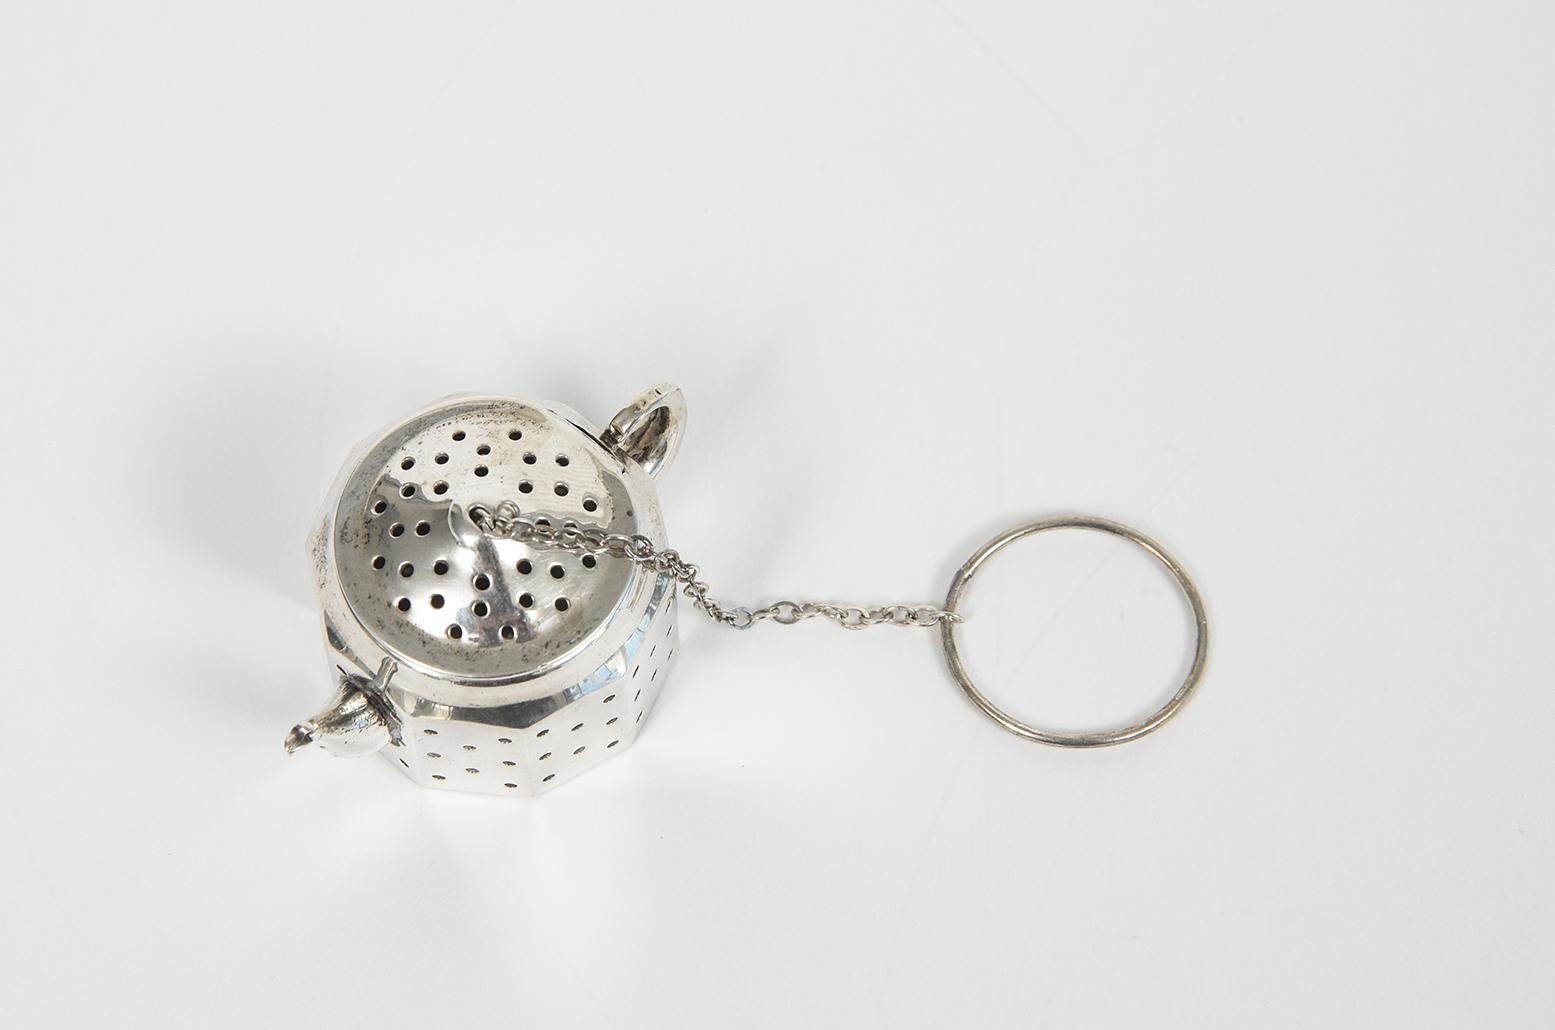 Amcraft Sterling Silver Figural Teapot Tea Ball Strainer Holder In Good Condition For Sale In Miami Beach, FL